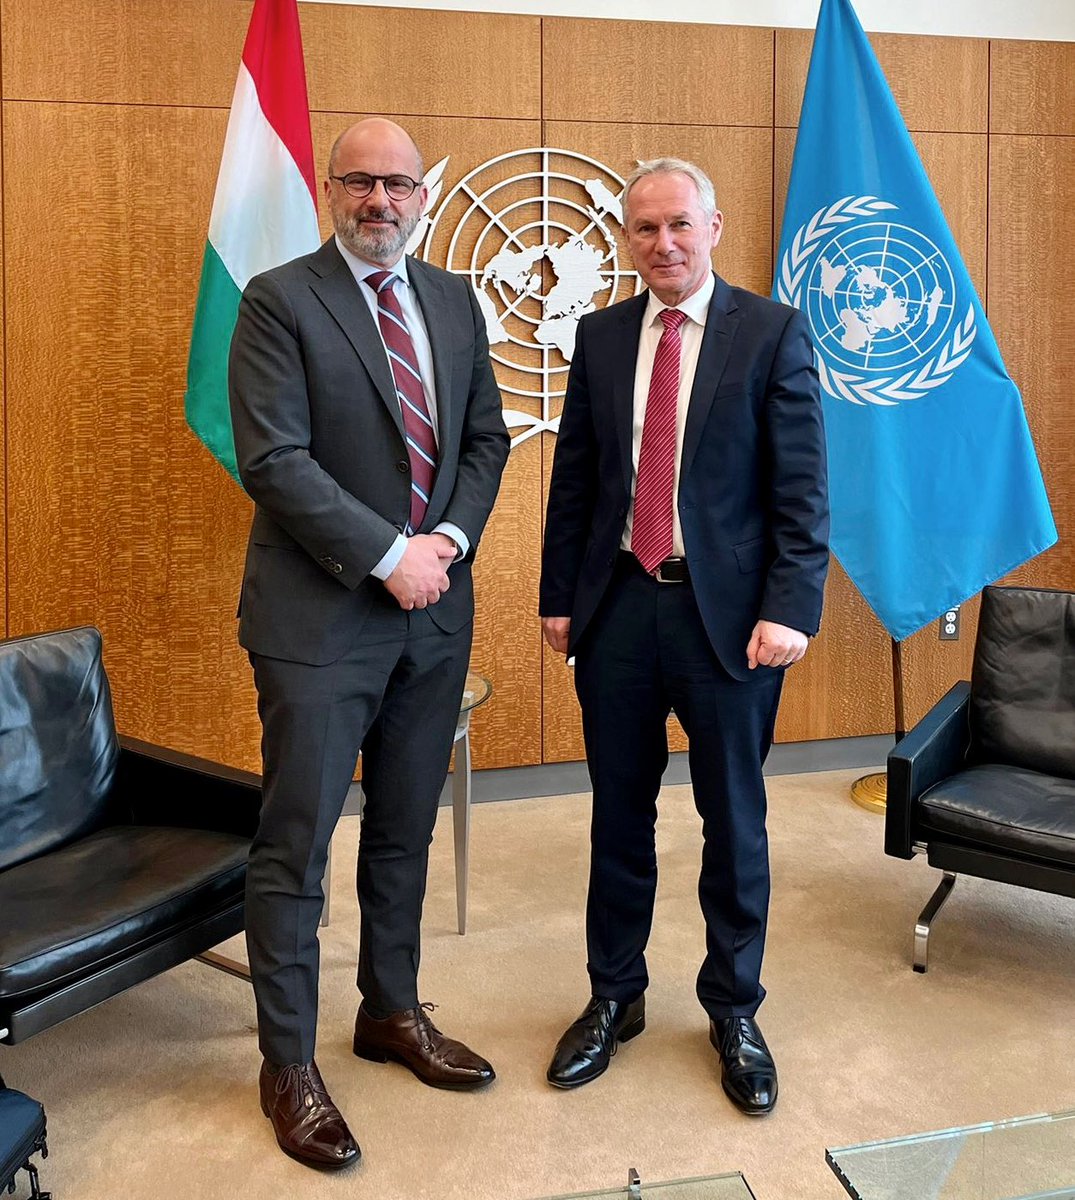 I thanked @UNPiper, Special Advisor on #Solutions for #InternalDisplacement for briefing Member States on the important and ongoing work that transcends the humanitarian, development and security silos.